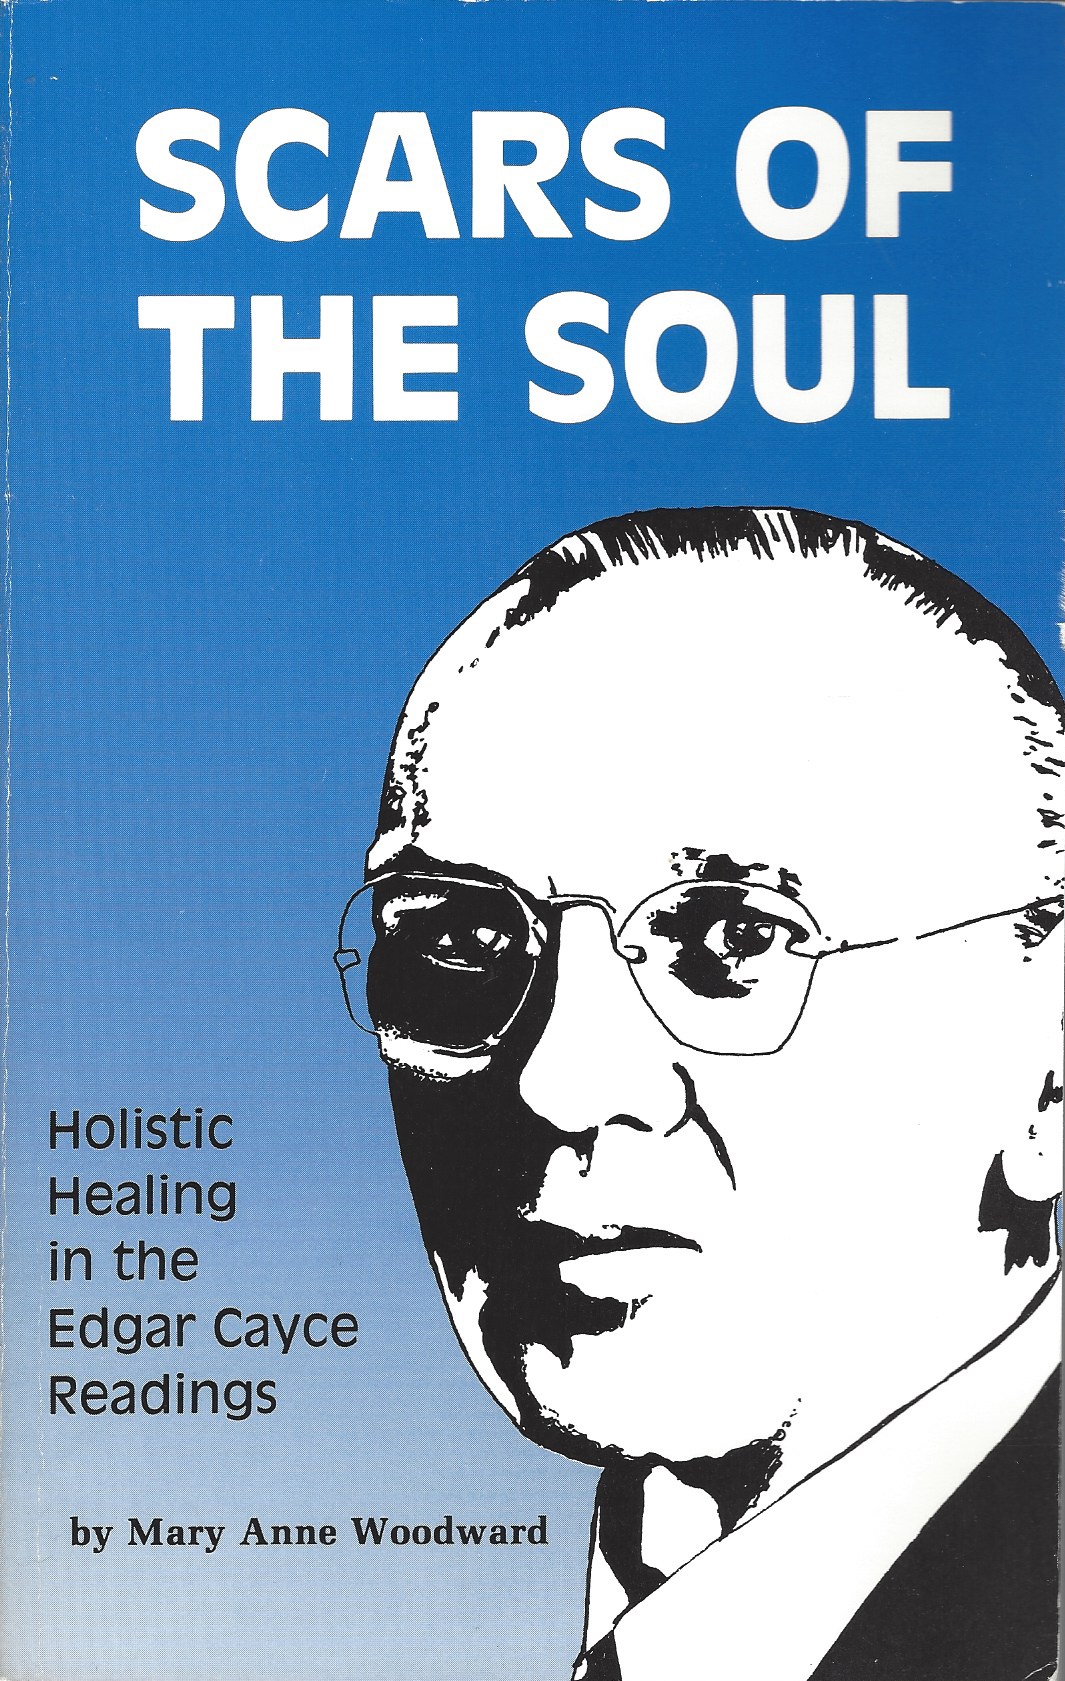 WOODWARD, MARY ANN - Scars of the Soul: Holistic Healing in the Edgar Cayce Readings